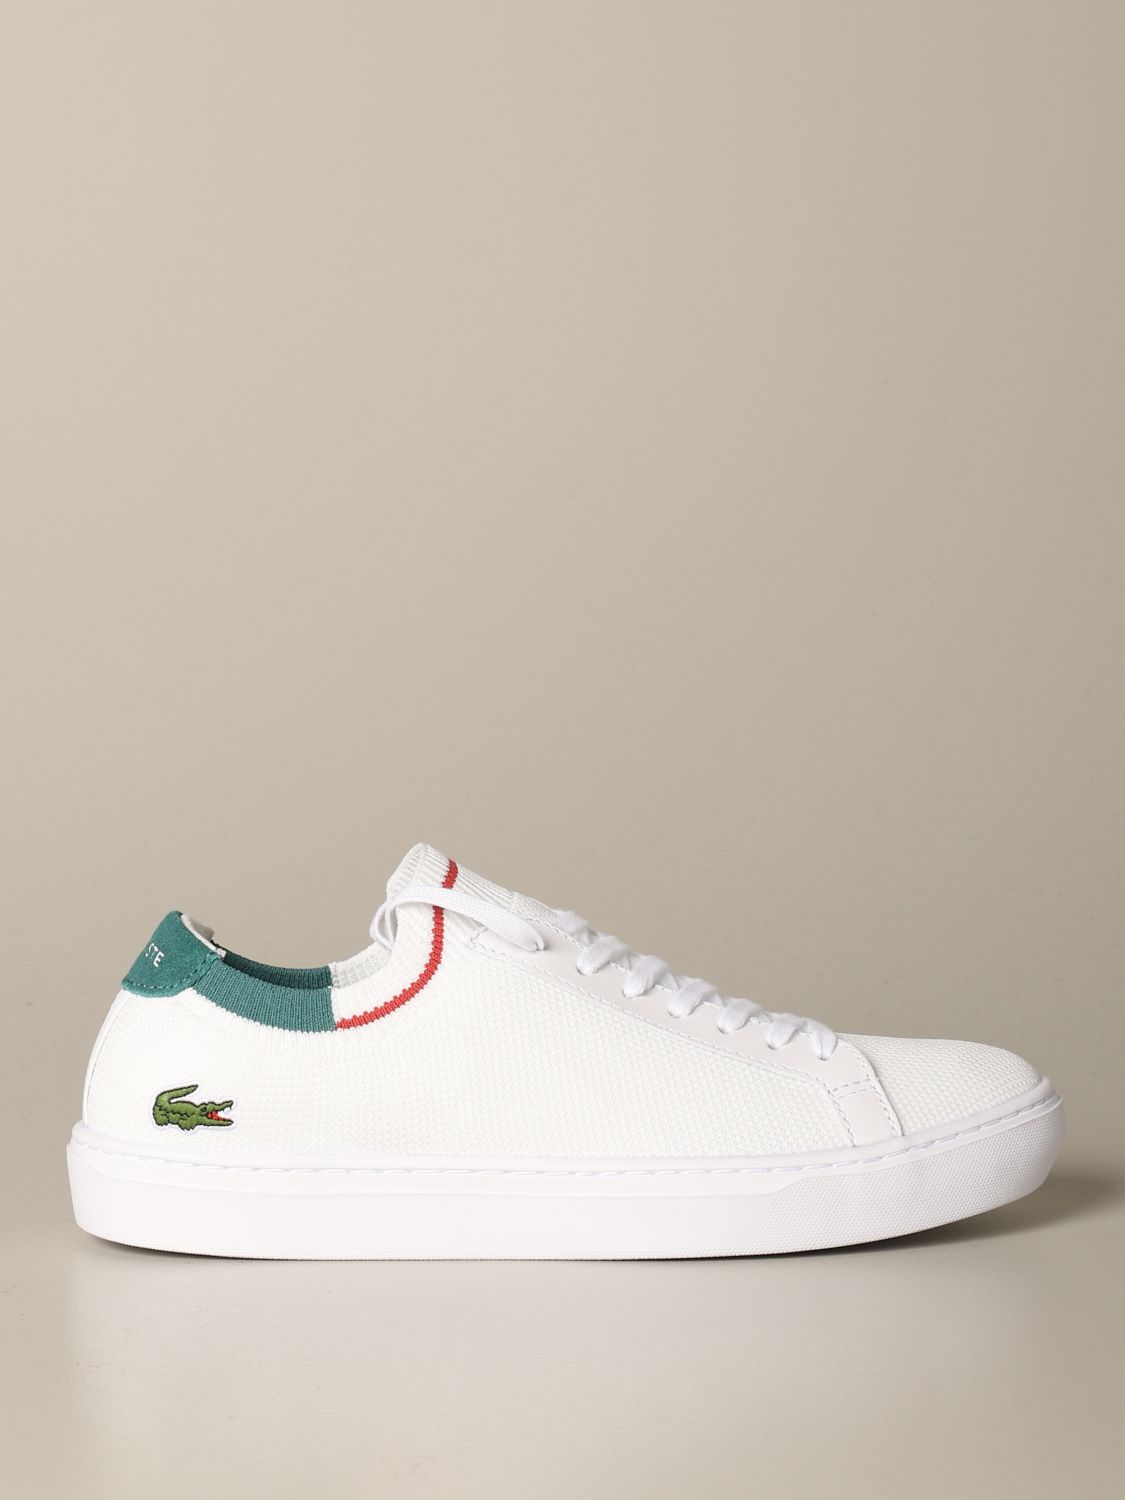 zoete smaak Grappig Syndicaat Lacoste Outlet: sneakers for man - White | Lacoste sneakers E00141 online  on GIGLIO.COM